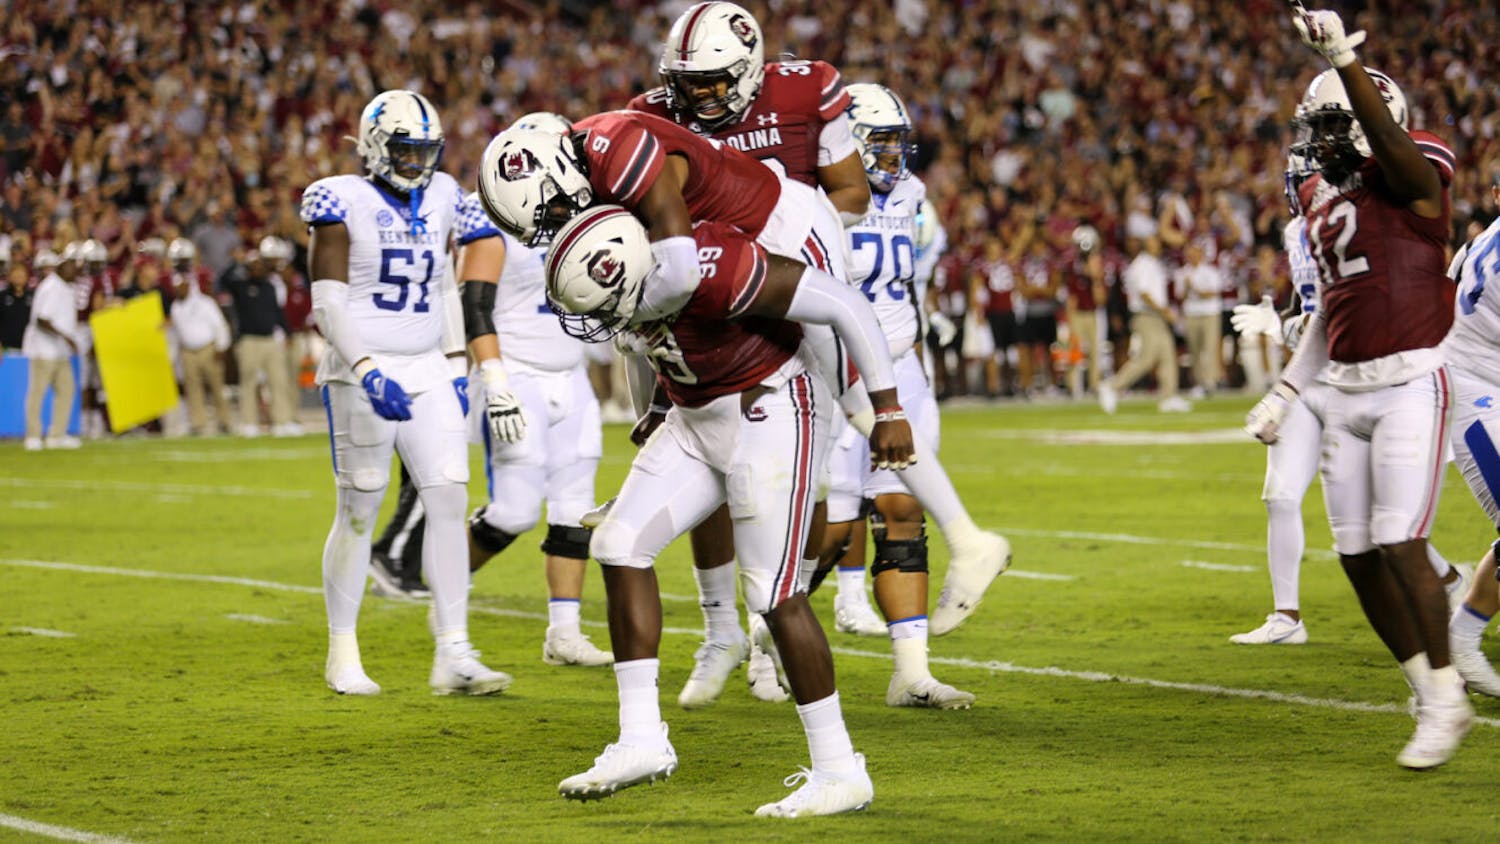 FILE — Redshirt senior defensive lineman Jabari Ellis and redshirt sophomore defensive back Cam Smith celebrate a big play against Kentucky on Sep. 25, 2021. The Wildcats defeated the Gamecocks 16-10.